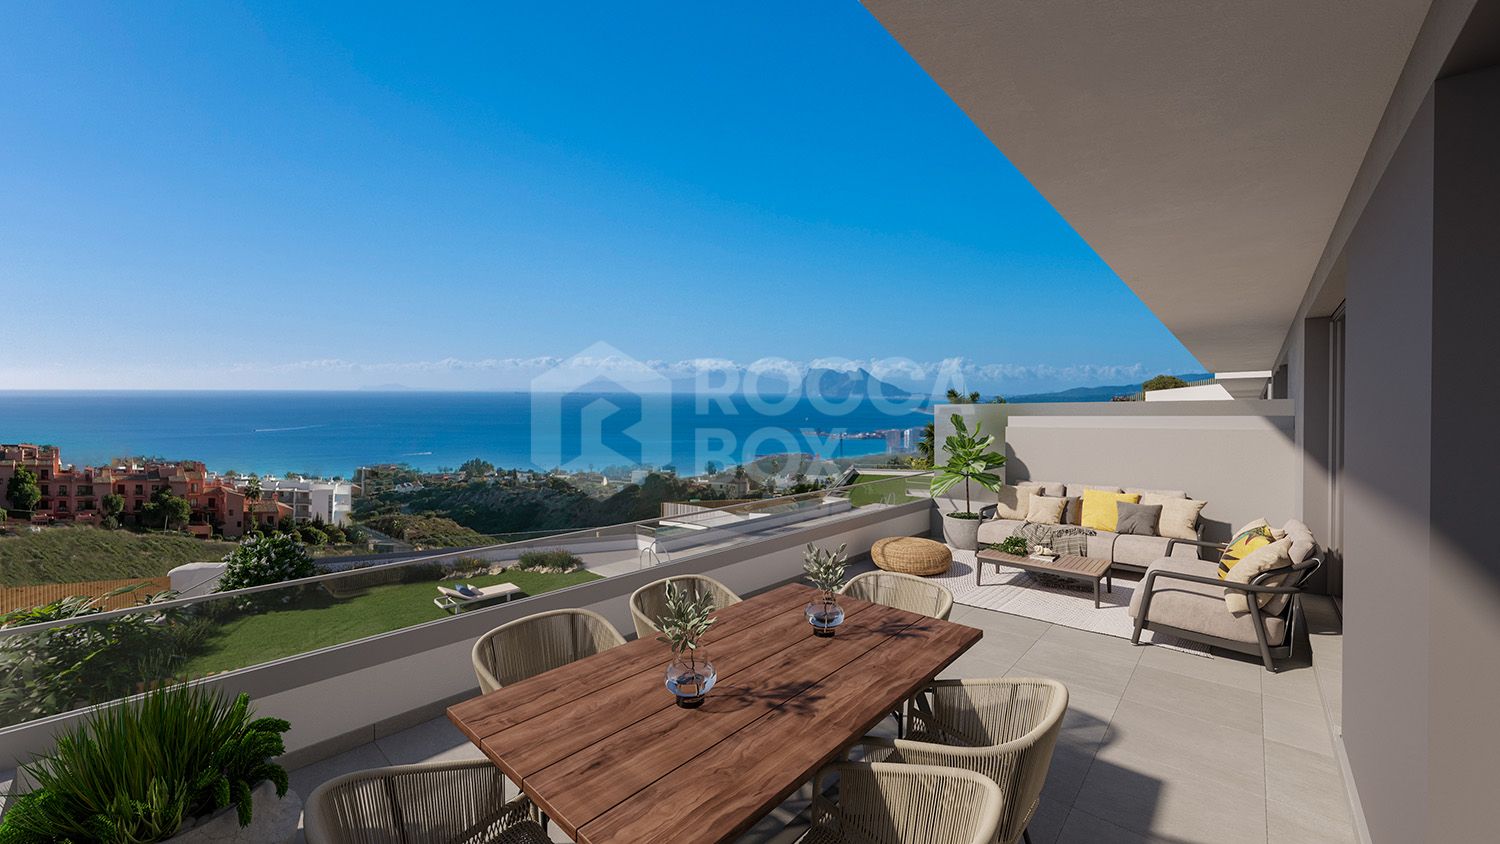 Luxury Villa with Stunning Sea Views of Gibraltar and Africa.